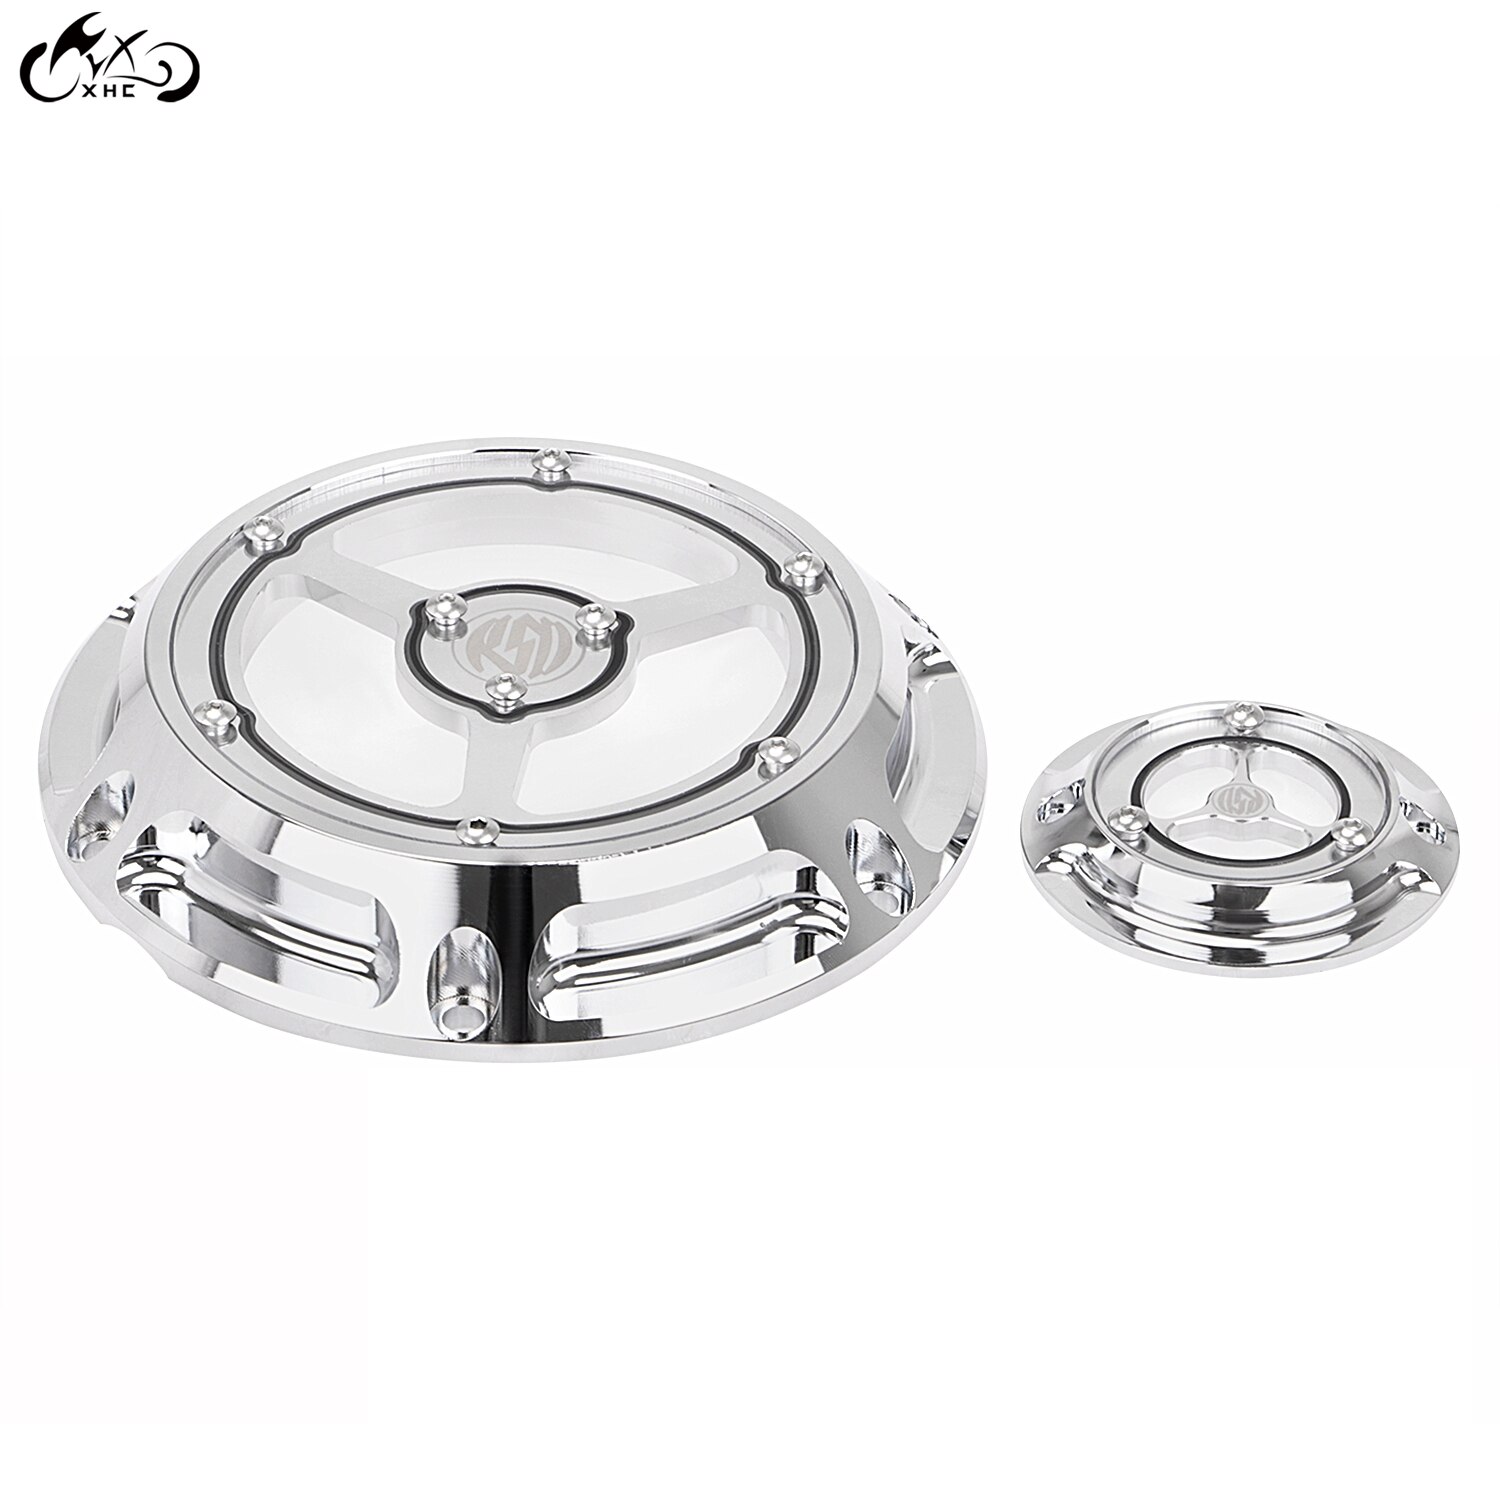 Motorcycle Cnc 6 Gaten Derby Cover Timing Timer Covers Chrome Aluminium Voor Harley Sportster XL883 XL1200 48 72 Ijzer 883